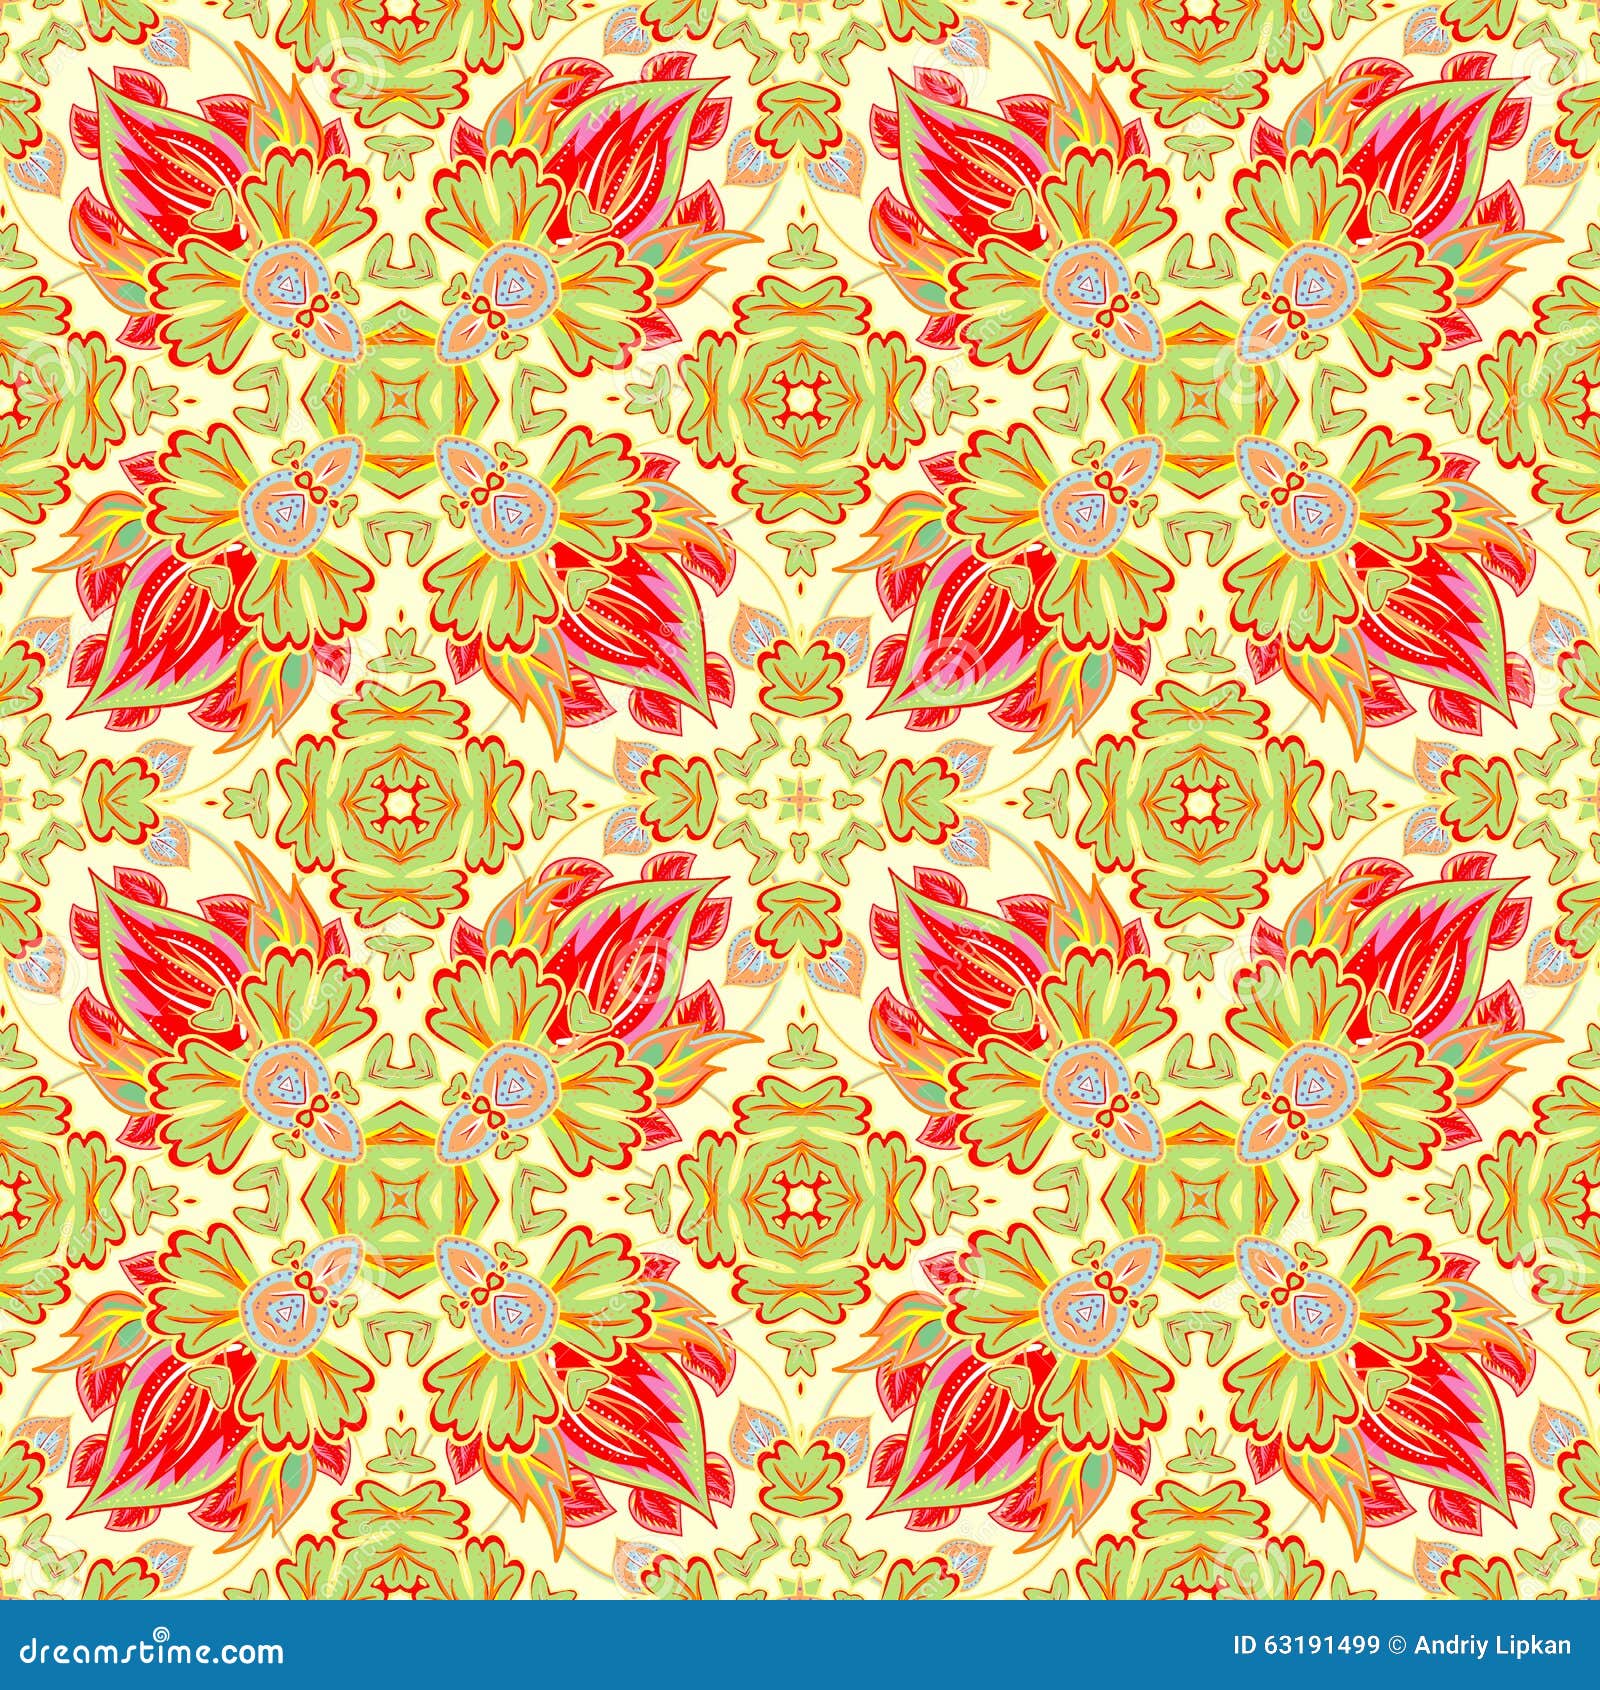 Luxury Damask Seamless Tiled Motif Vector Pattern for Fabric Stock ...